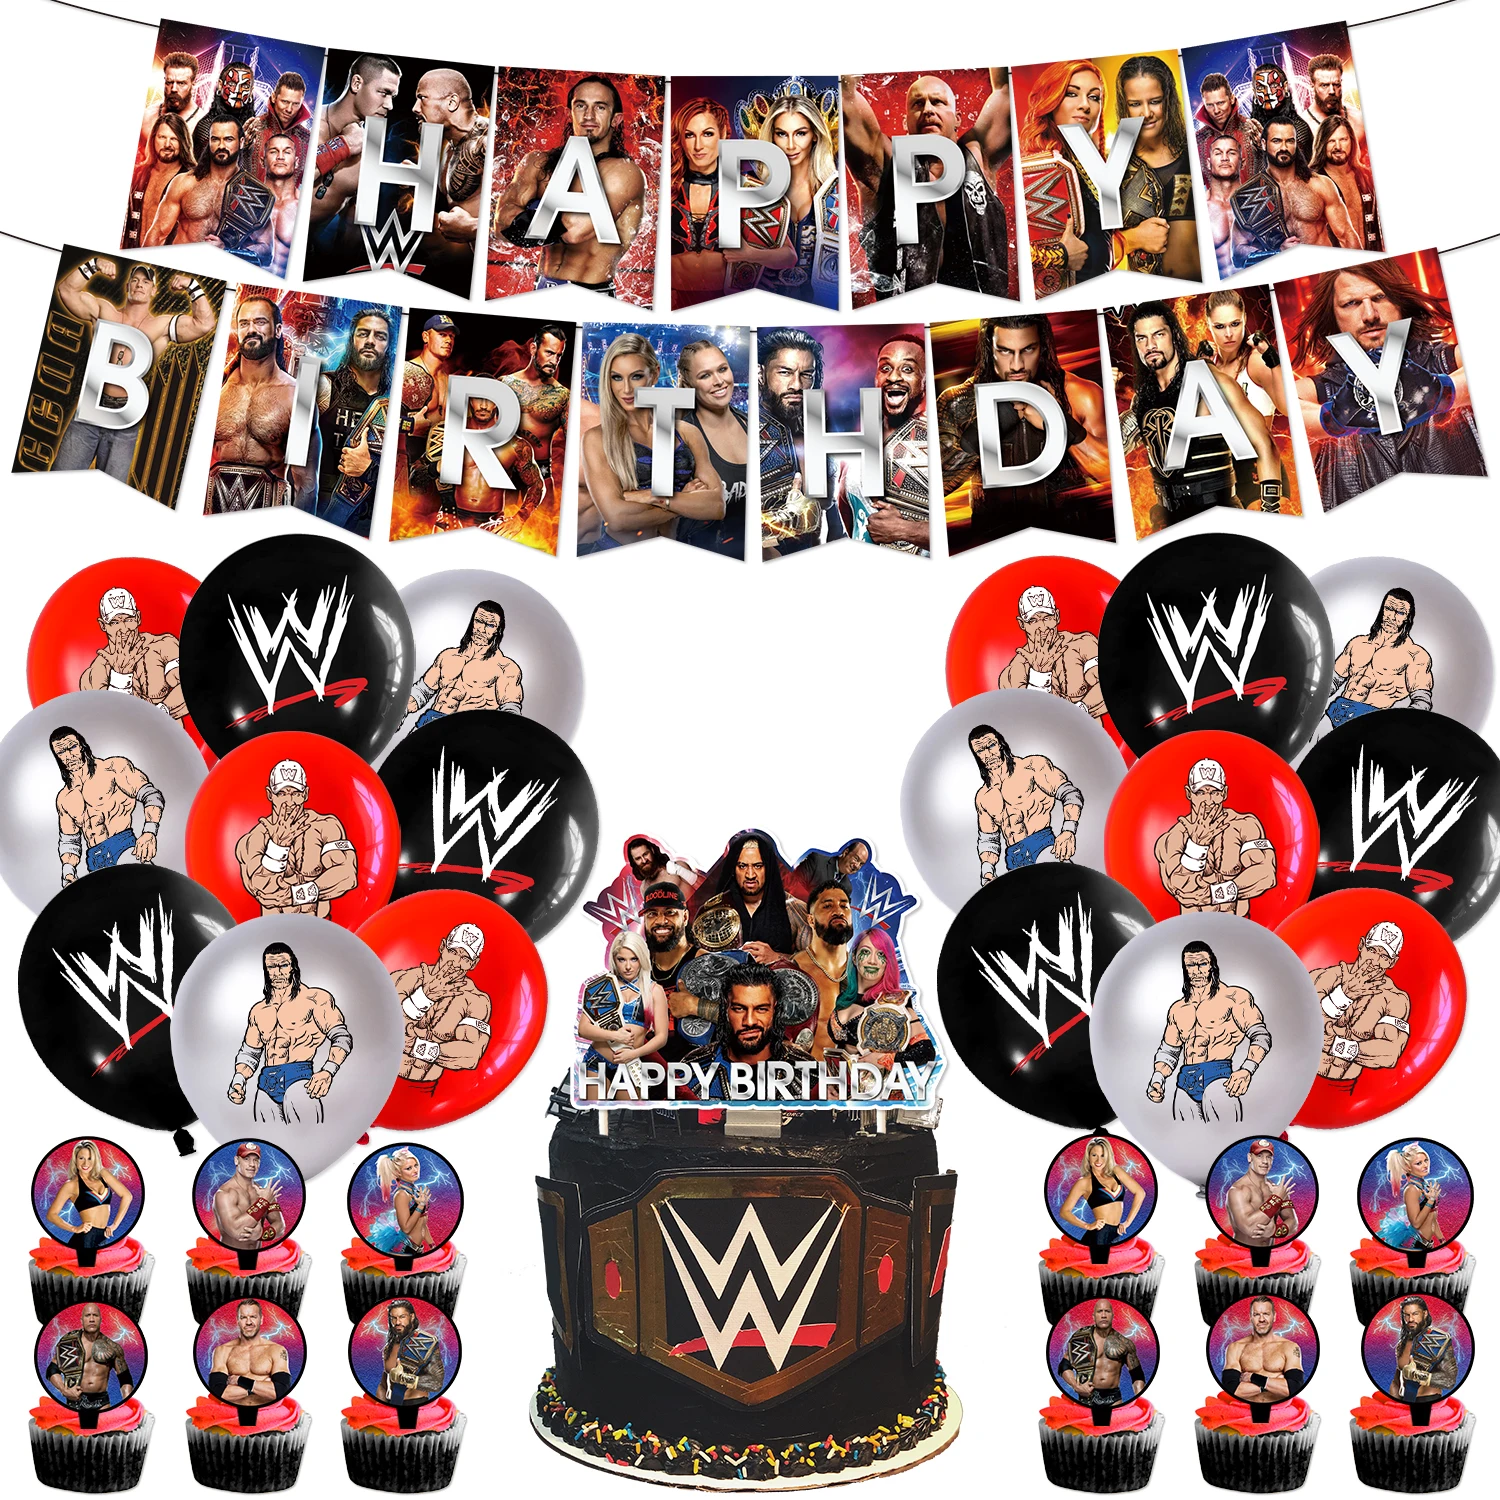  12PCS Wrestling Party Supplies Wrestling Themed Party